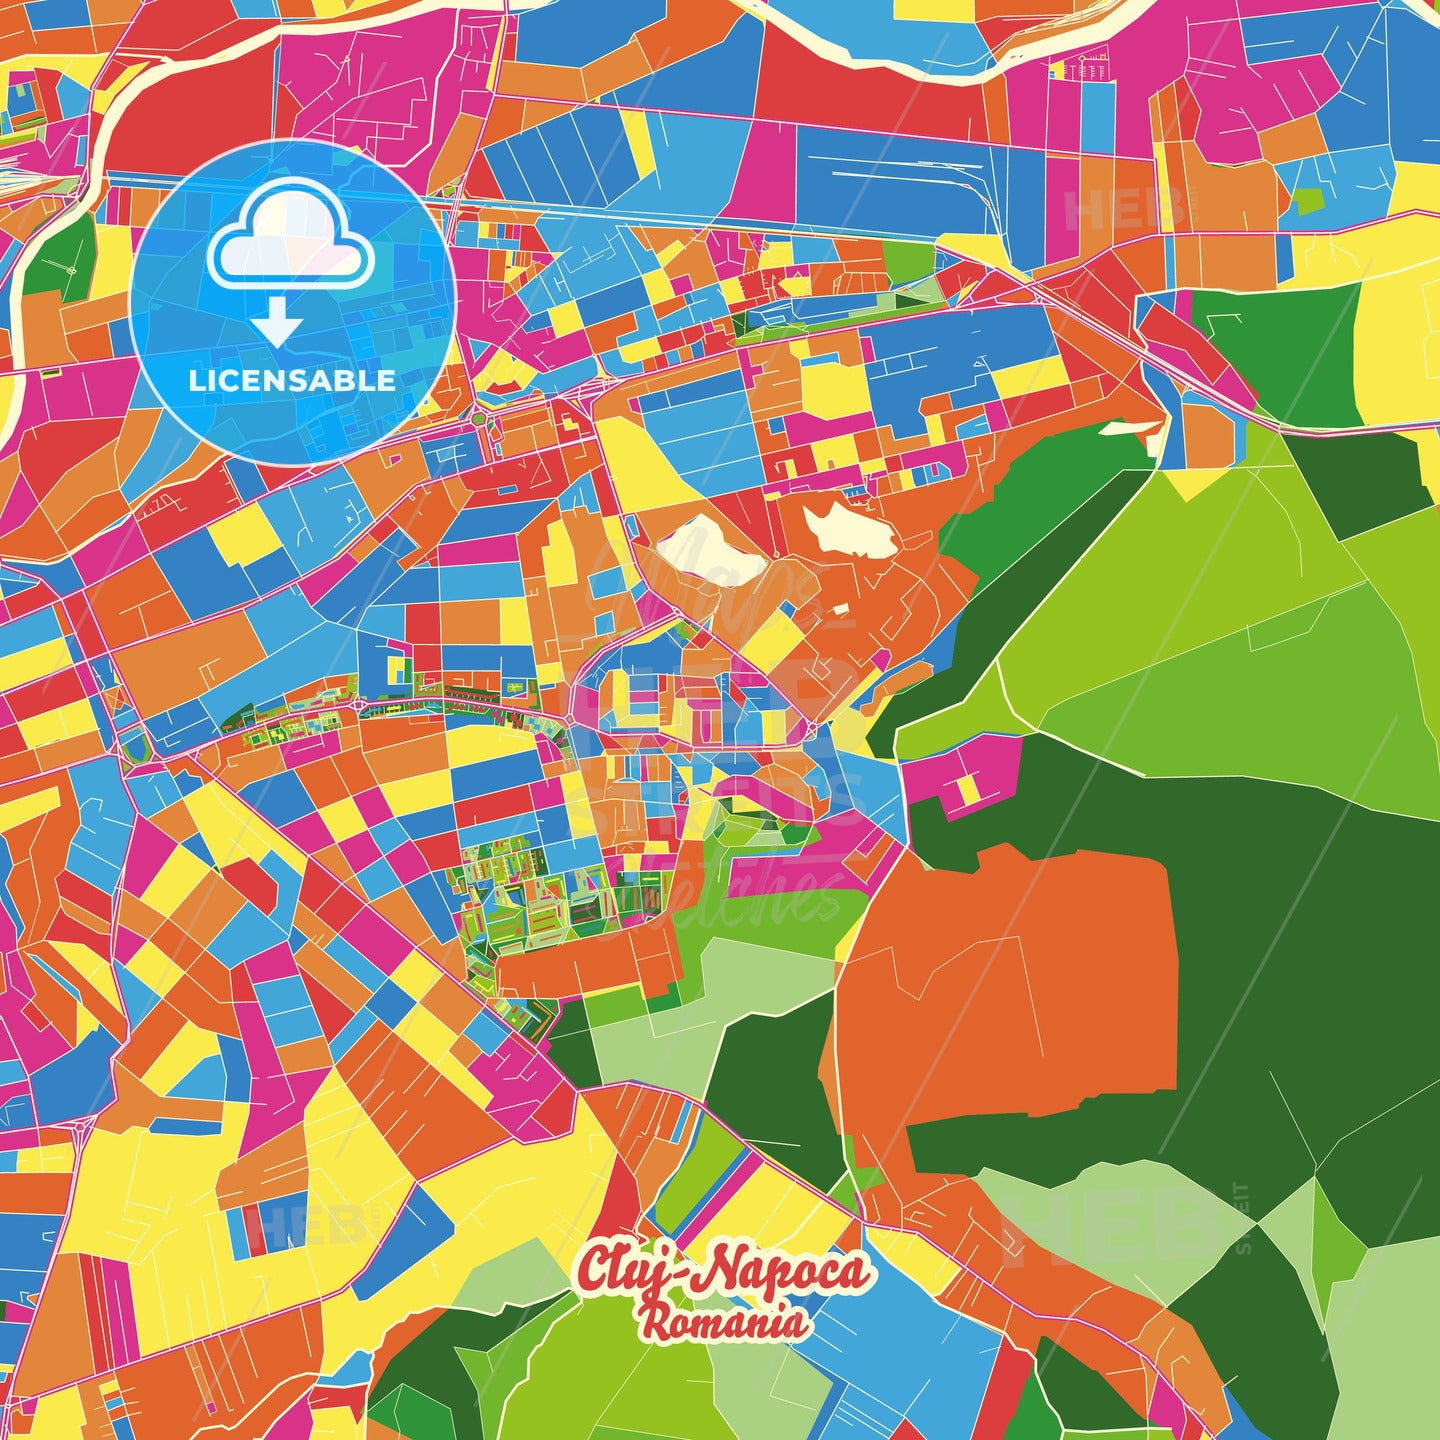 Cluj-Napoca, Romania Crazy Colorful Street Map Poster Template - HEBSTREITS Sketches